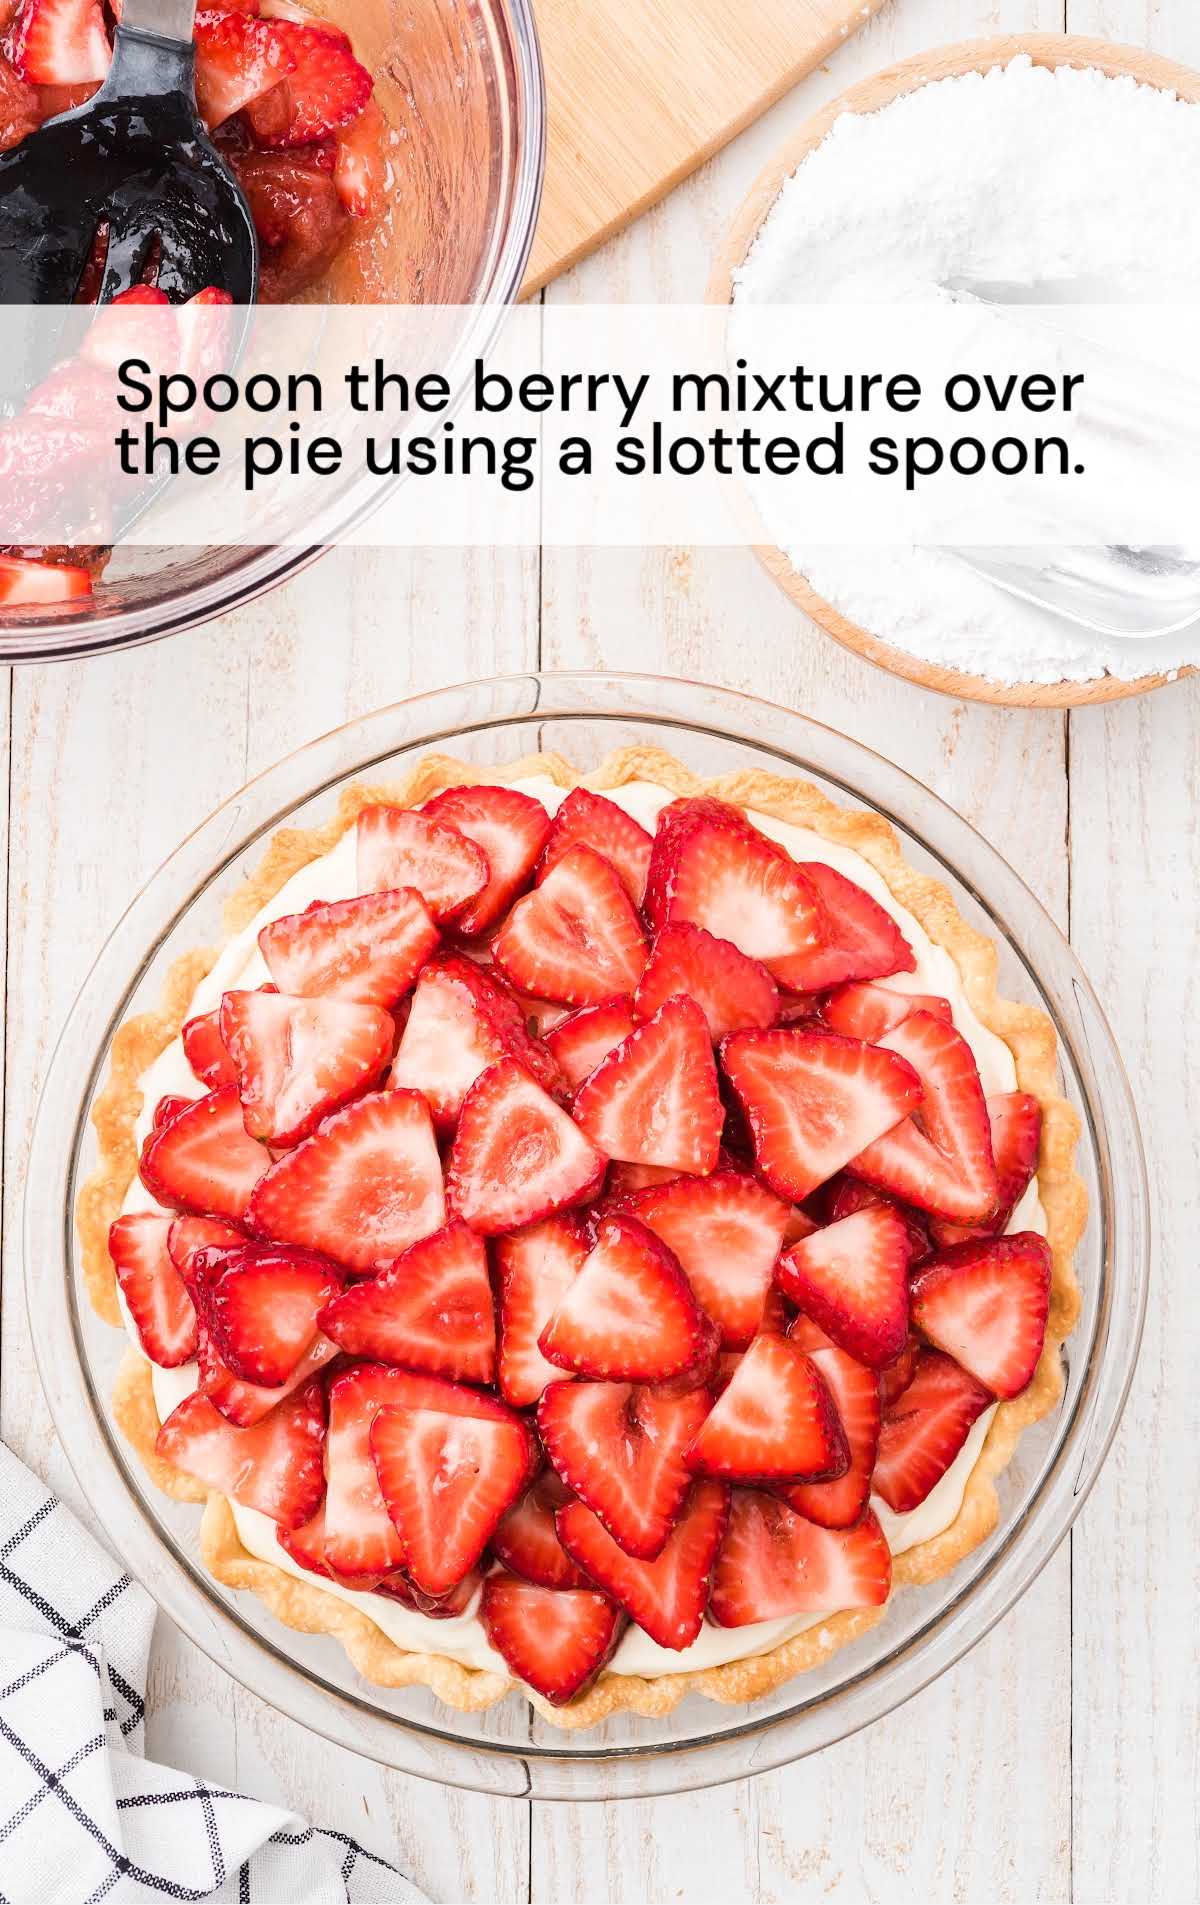 strawberry mixture spooned on top of the pie in a glass bowl